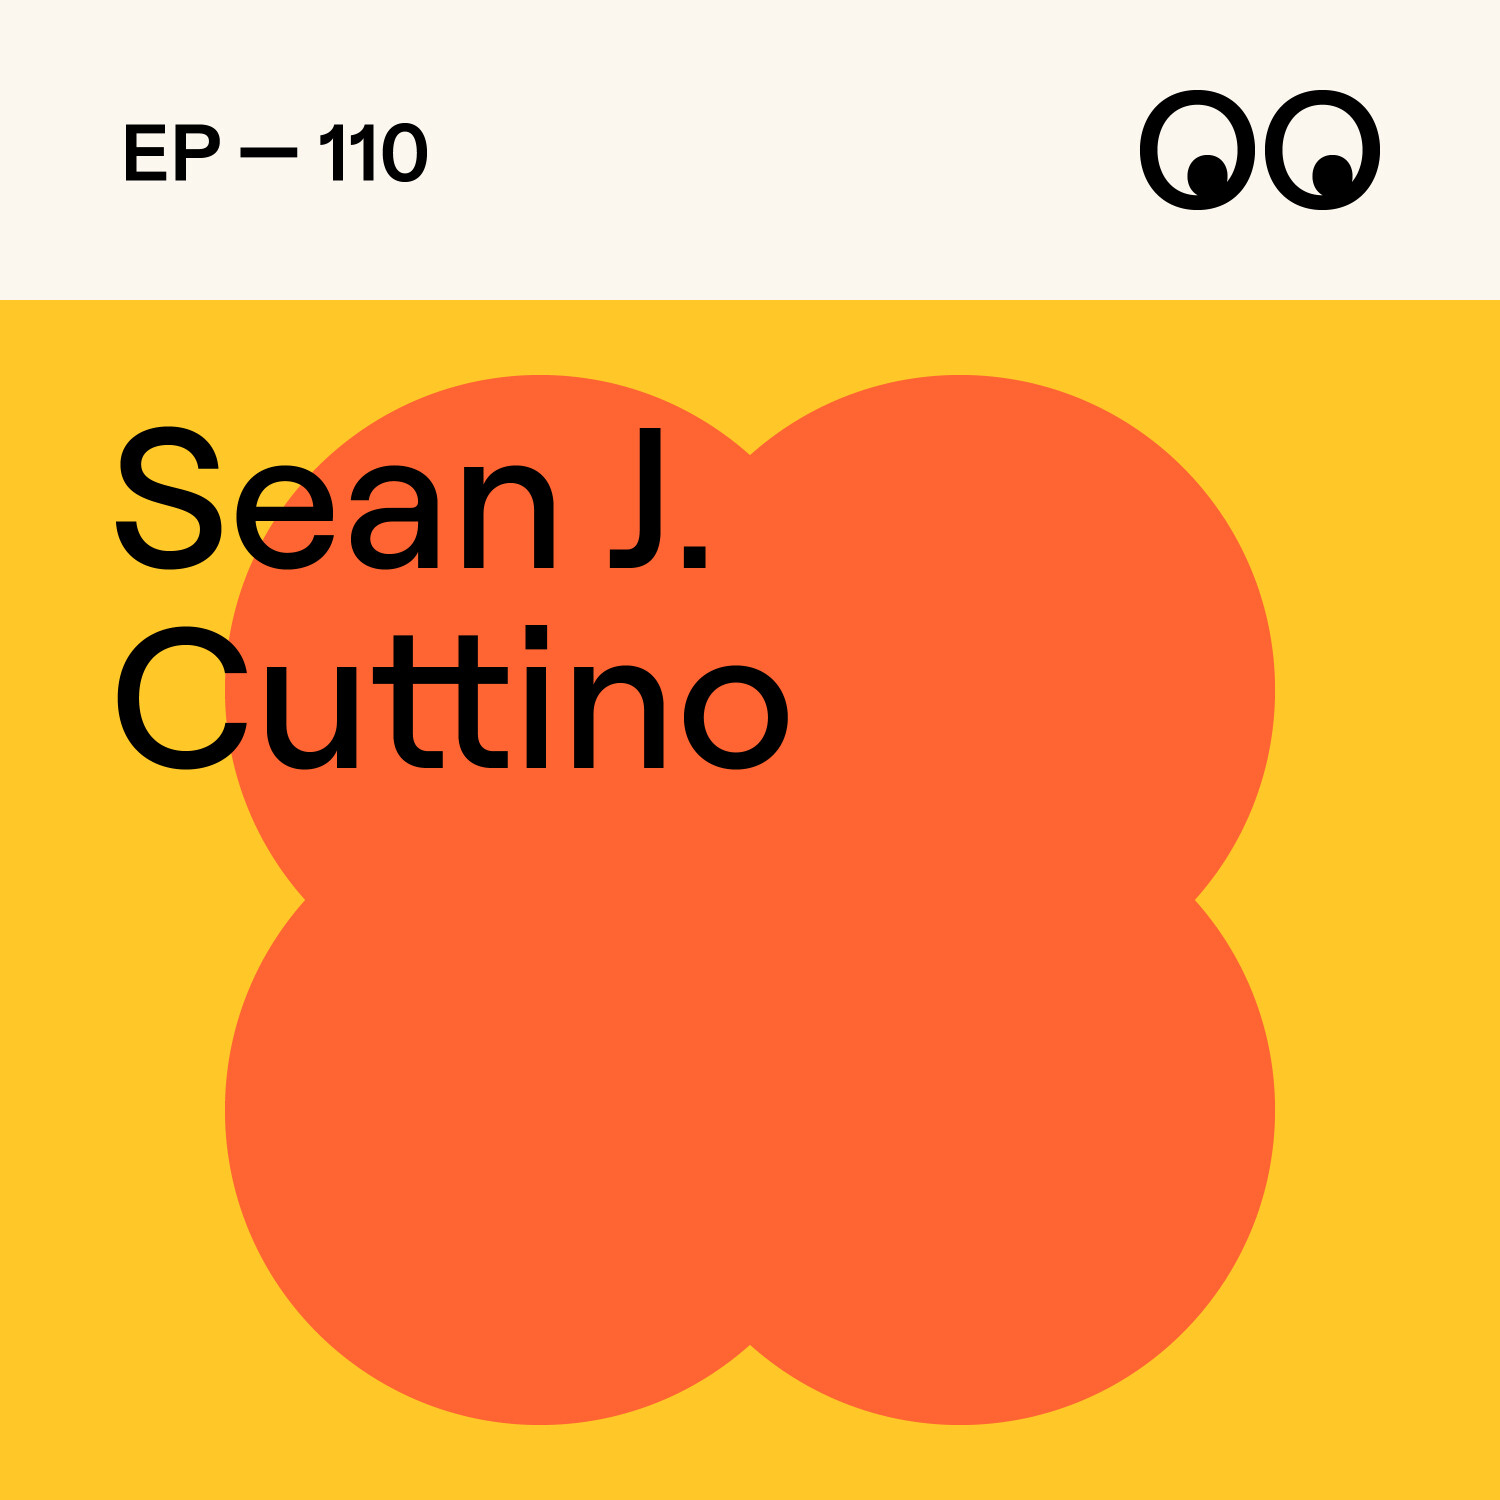 The art of adaptation and staying ahead in changing times, with Sean J. Cuttino